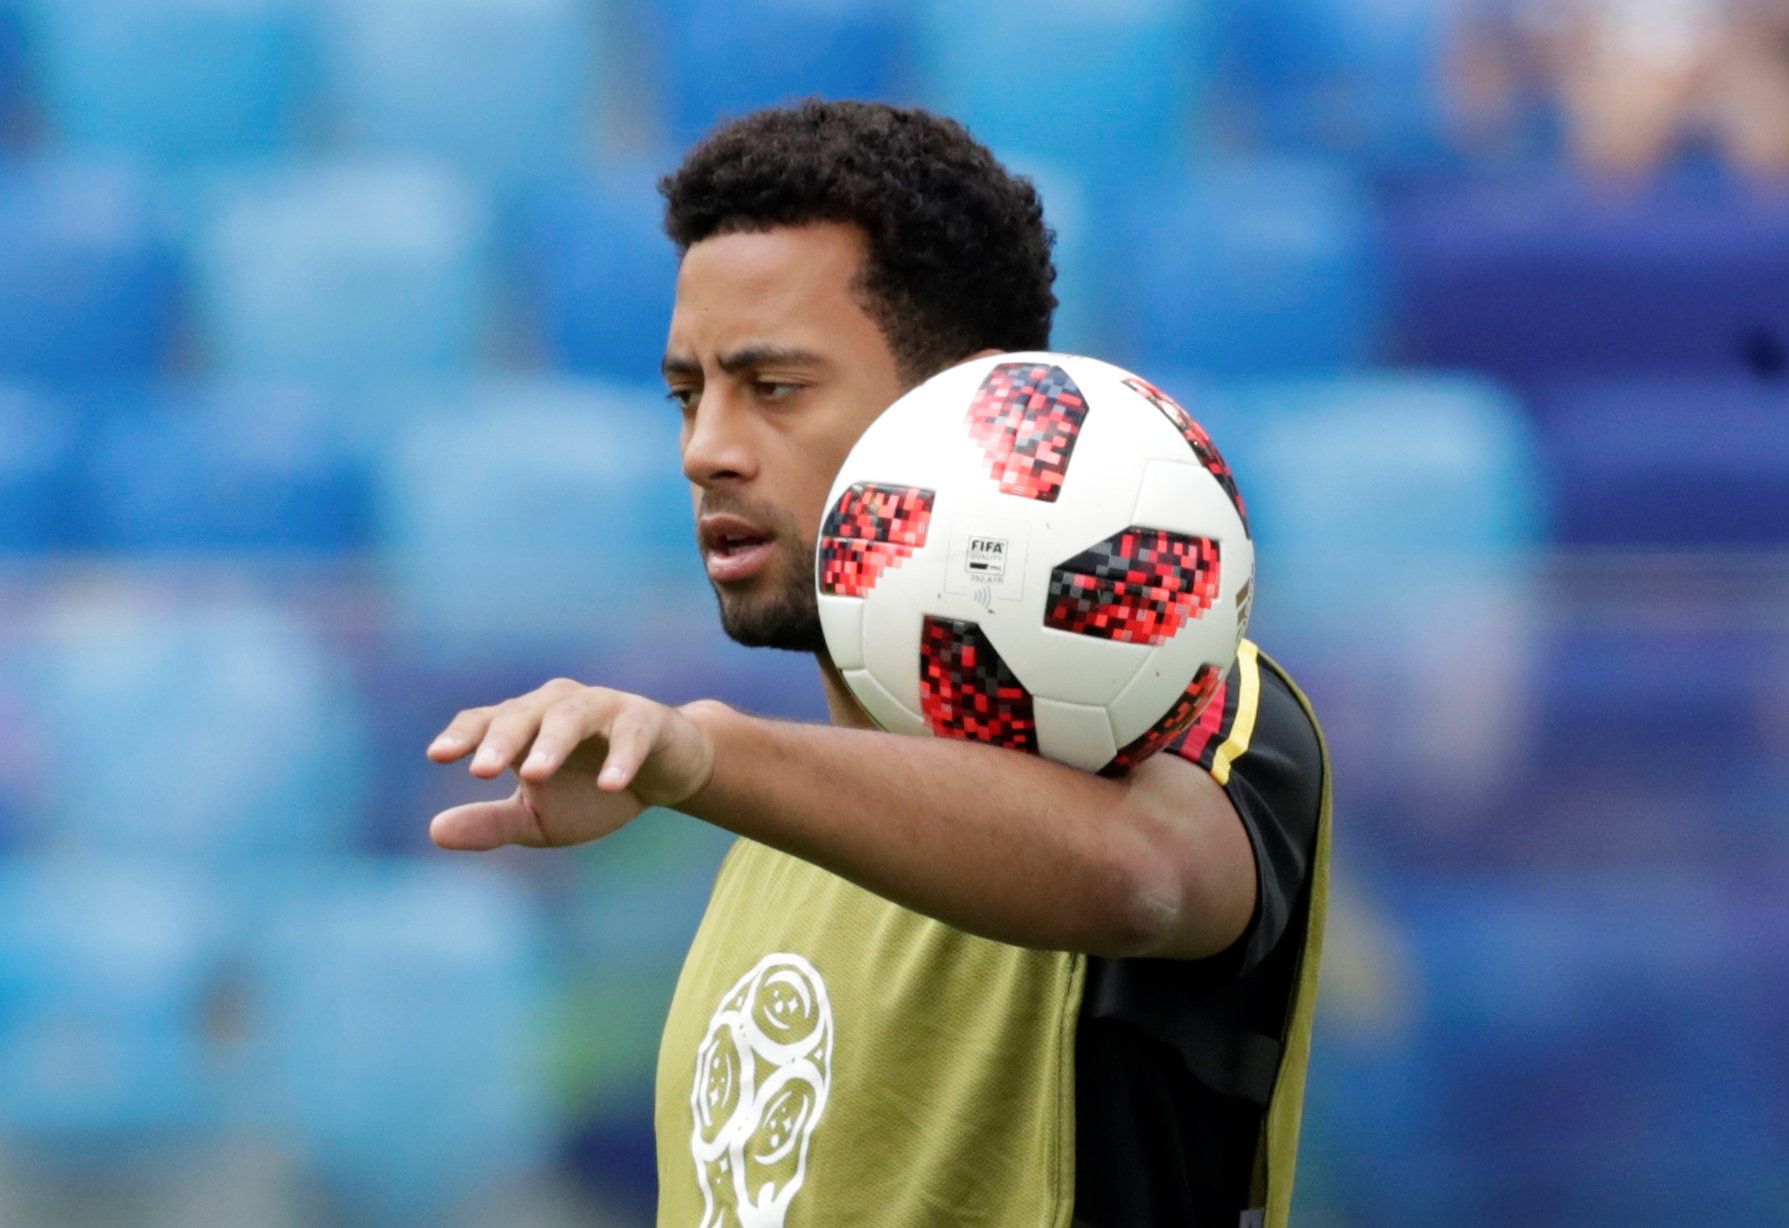 Mousa Dembele warming up at the World Cup